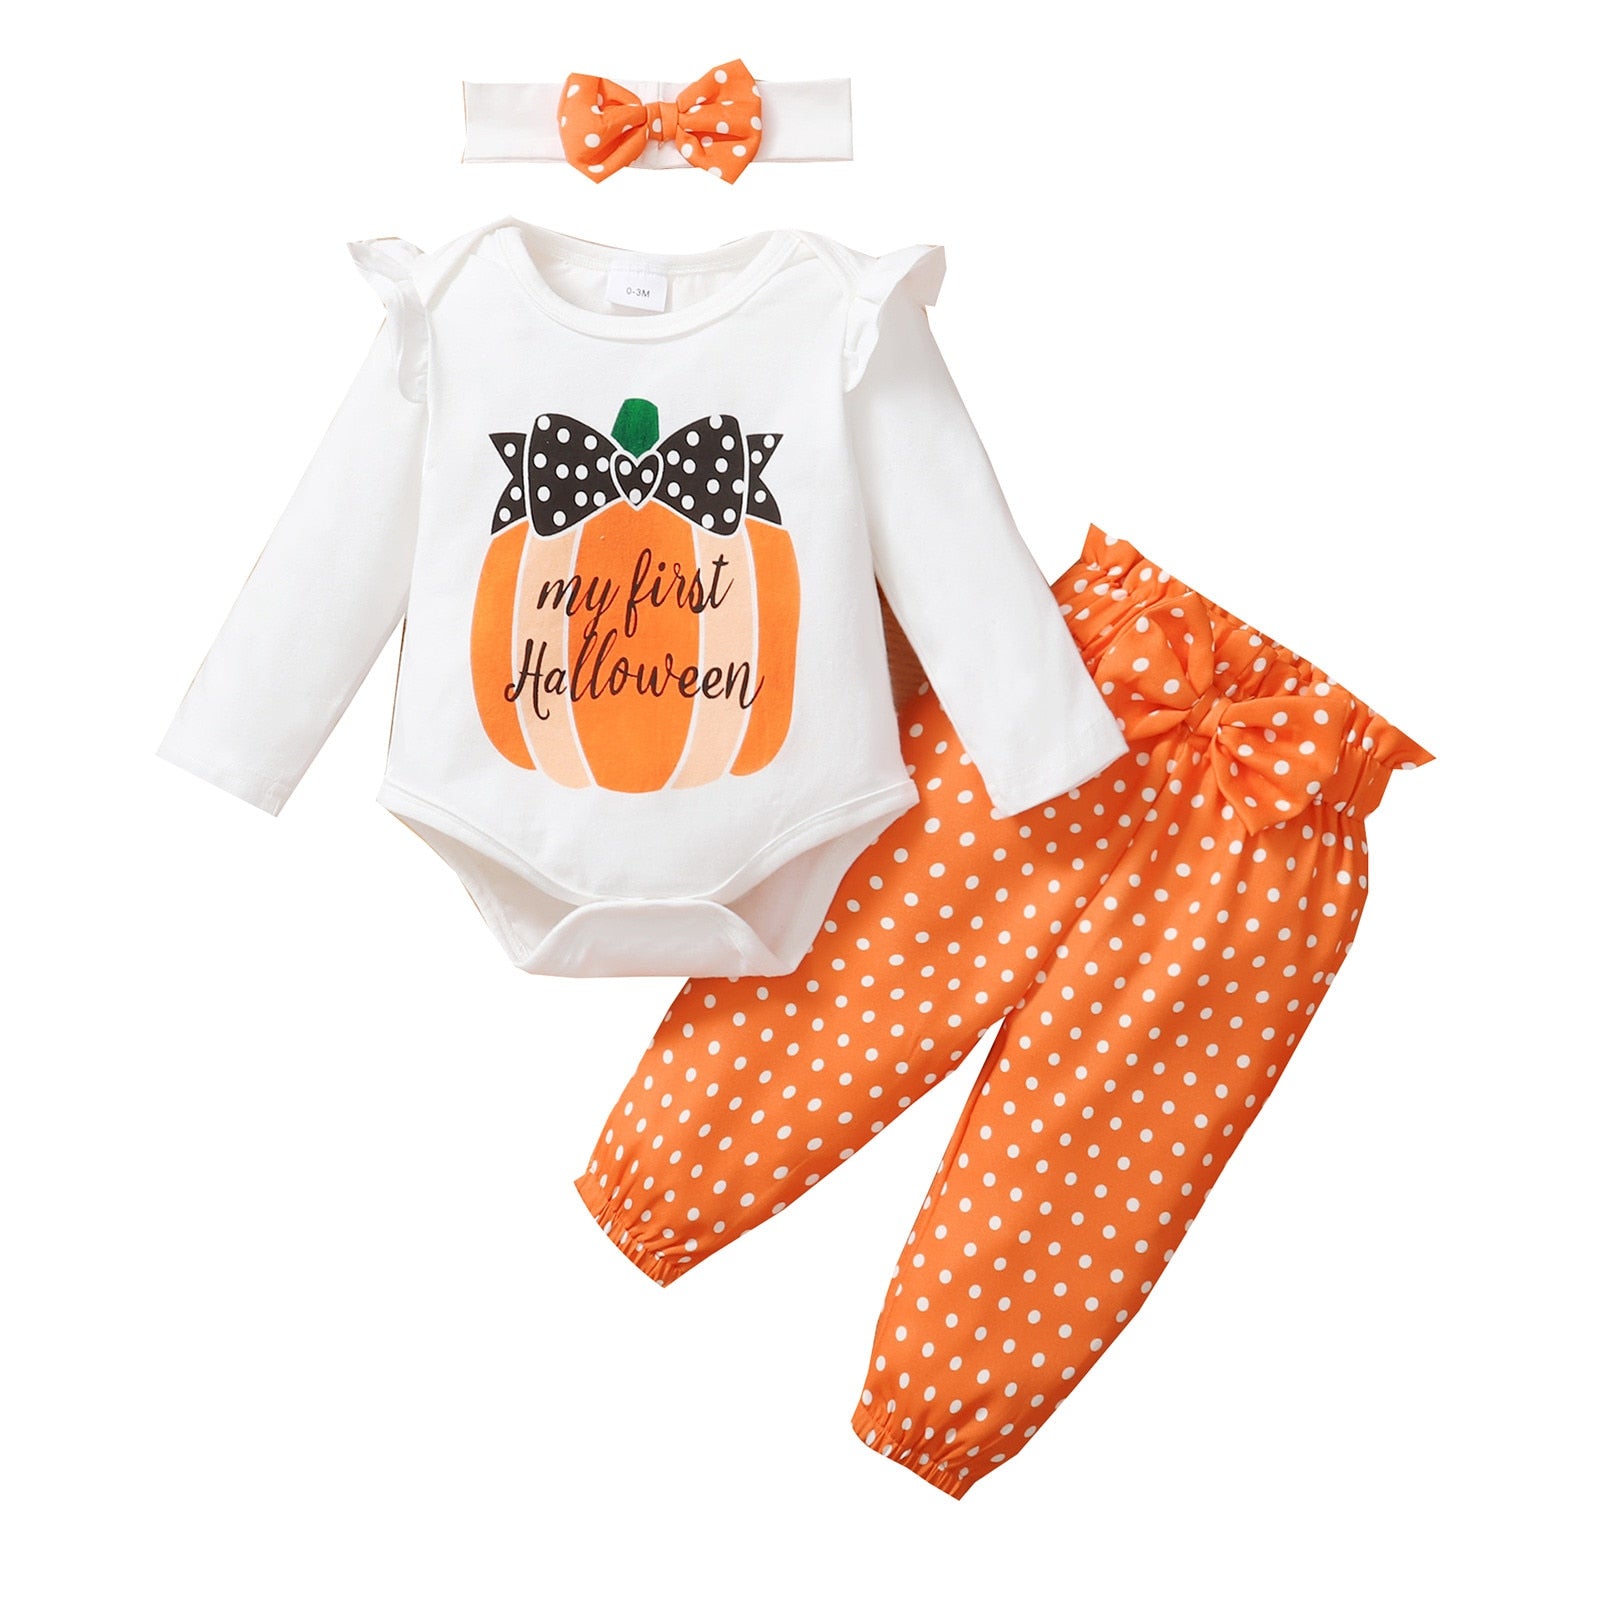 Celebrate Baby's First Halloween with Our Adorable 3-Piece Outfit Set